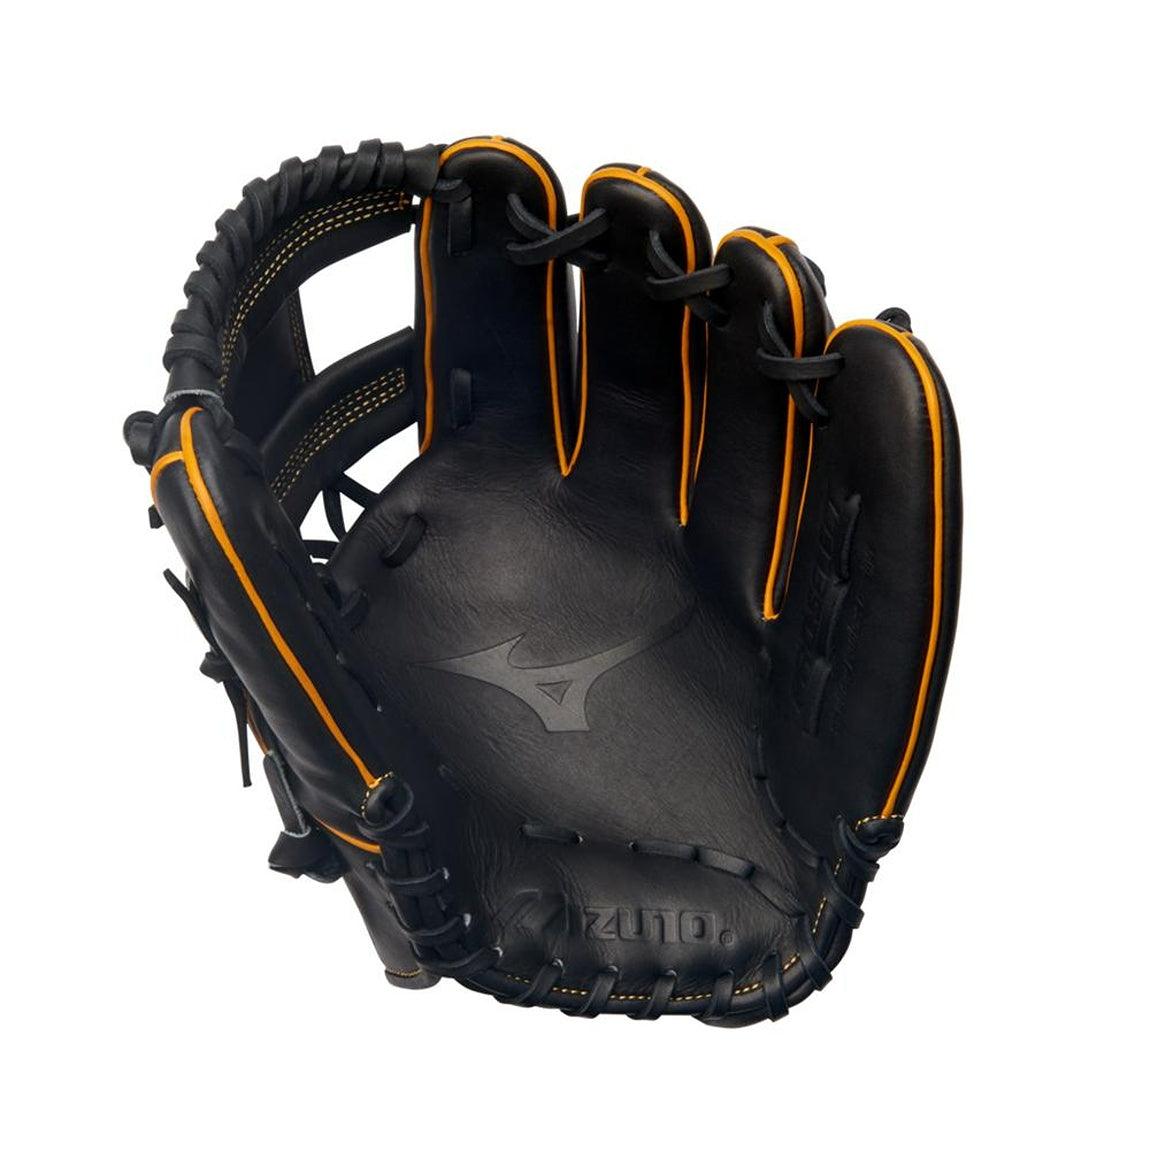 Pro Select Infield Baseball Glove 11.5" - Shallow Pocket - Sports Excellence